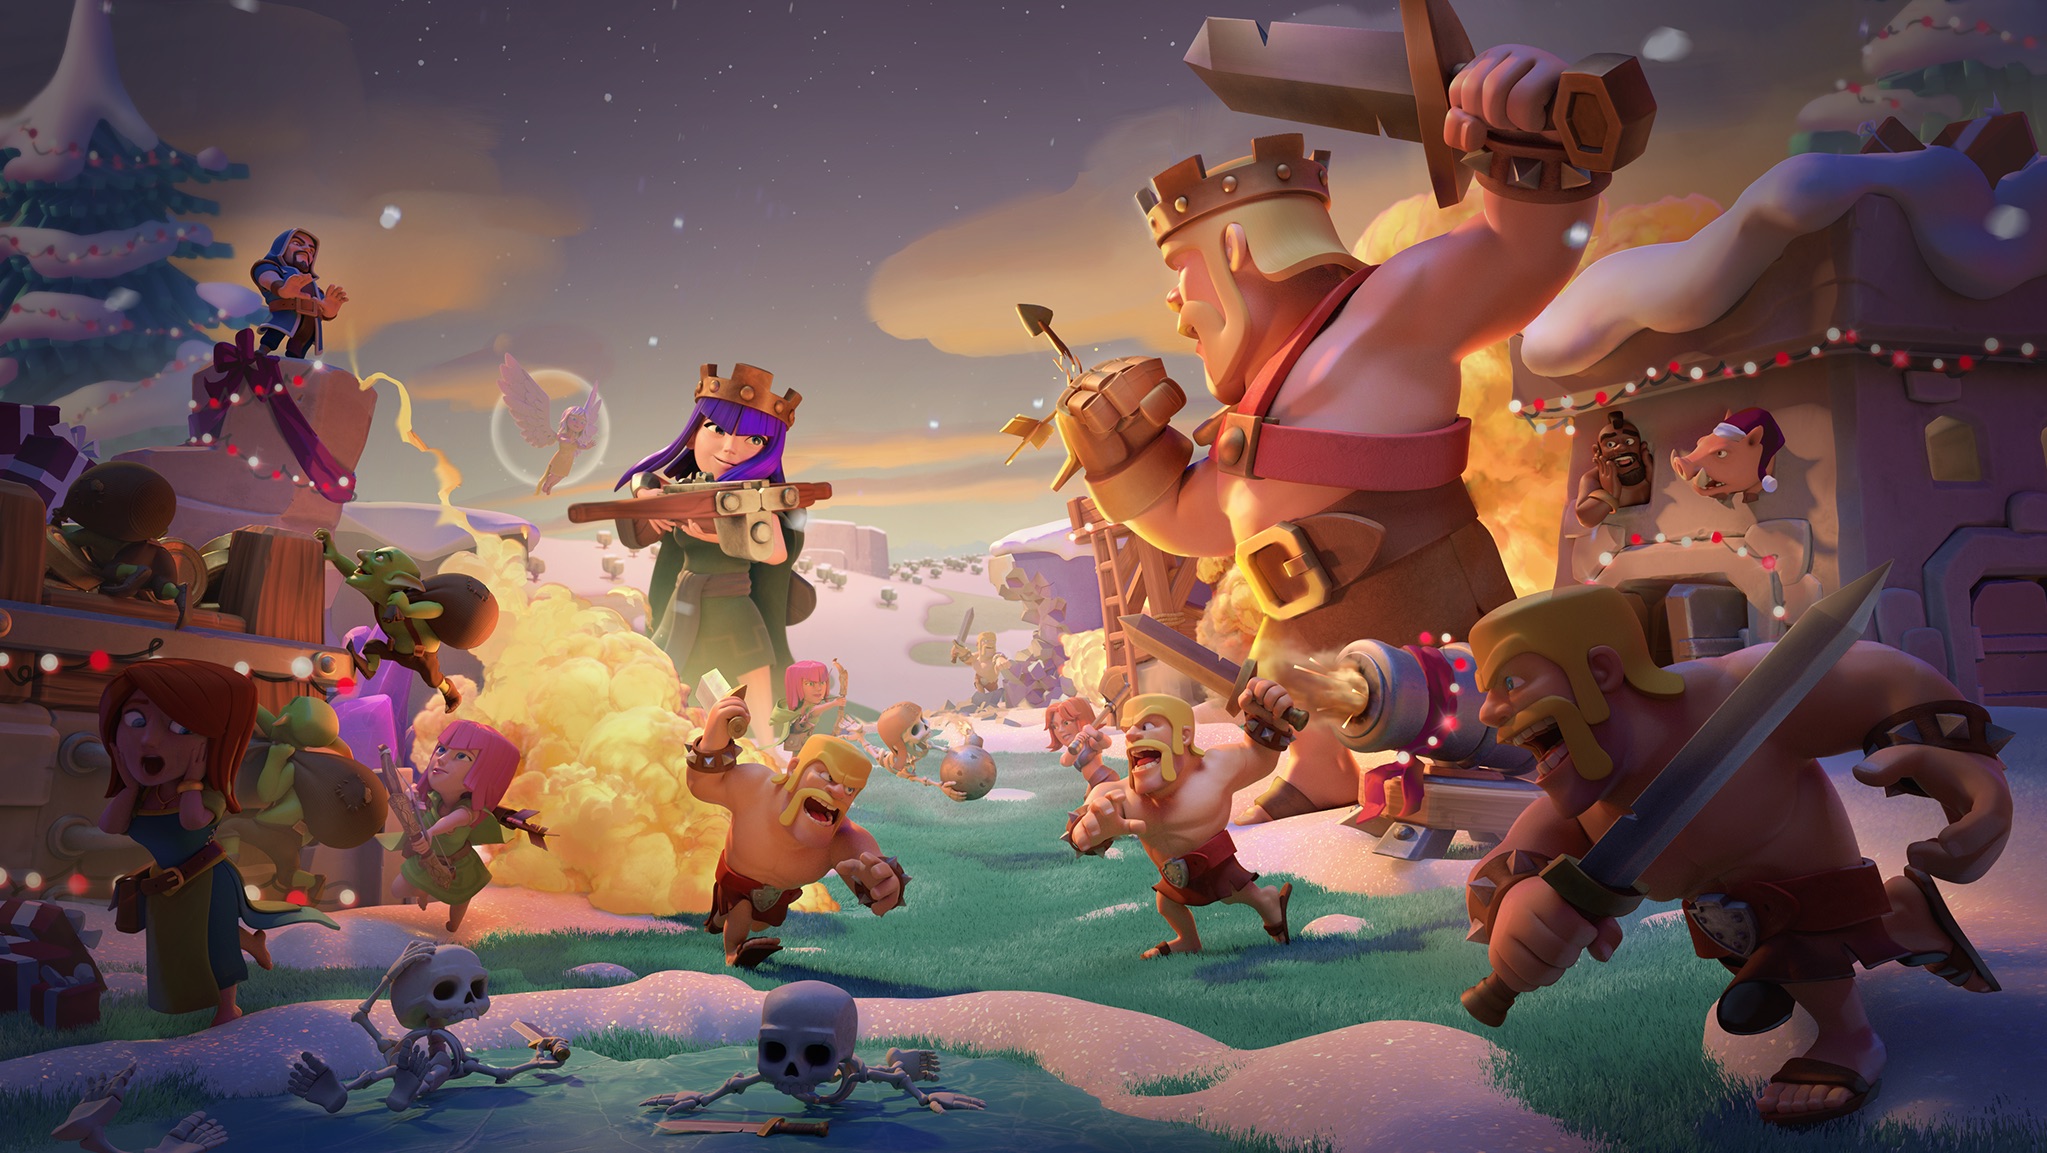 When the mobile strategy game Clash of Clans became a billion-dollar succes...